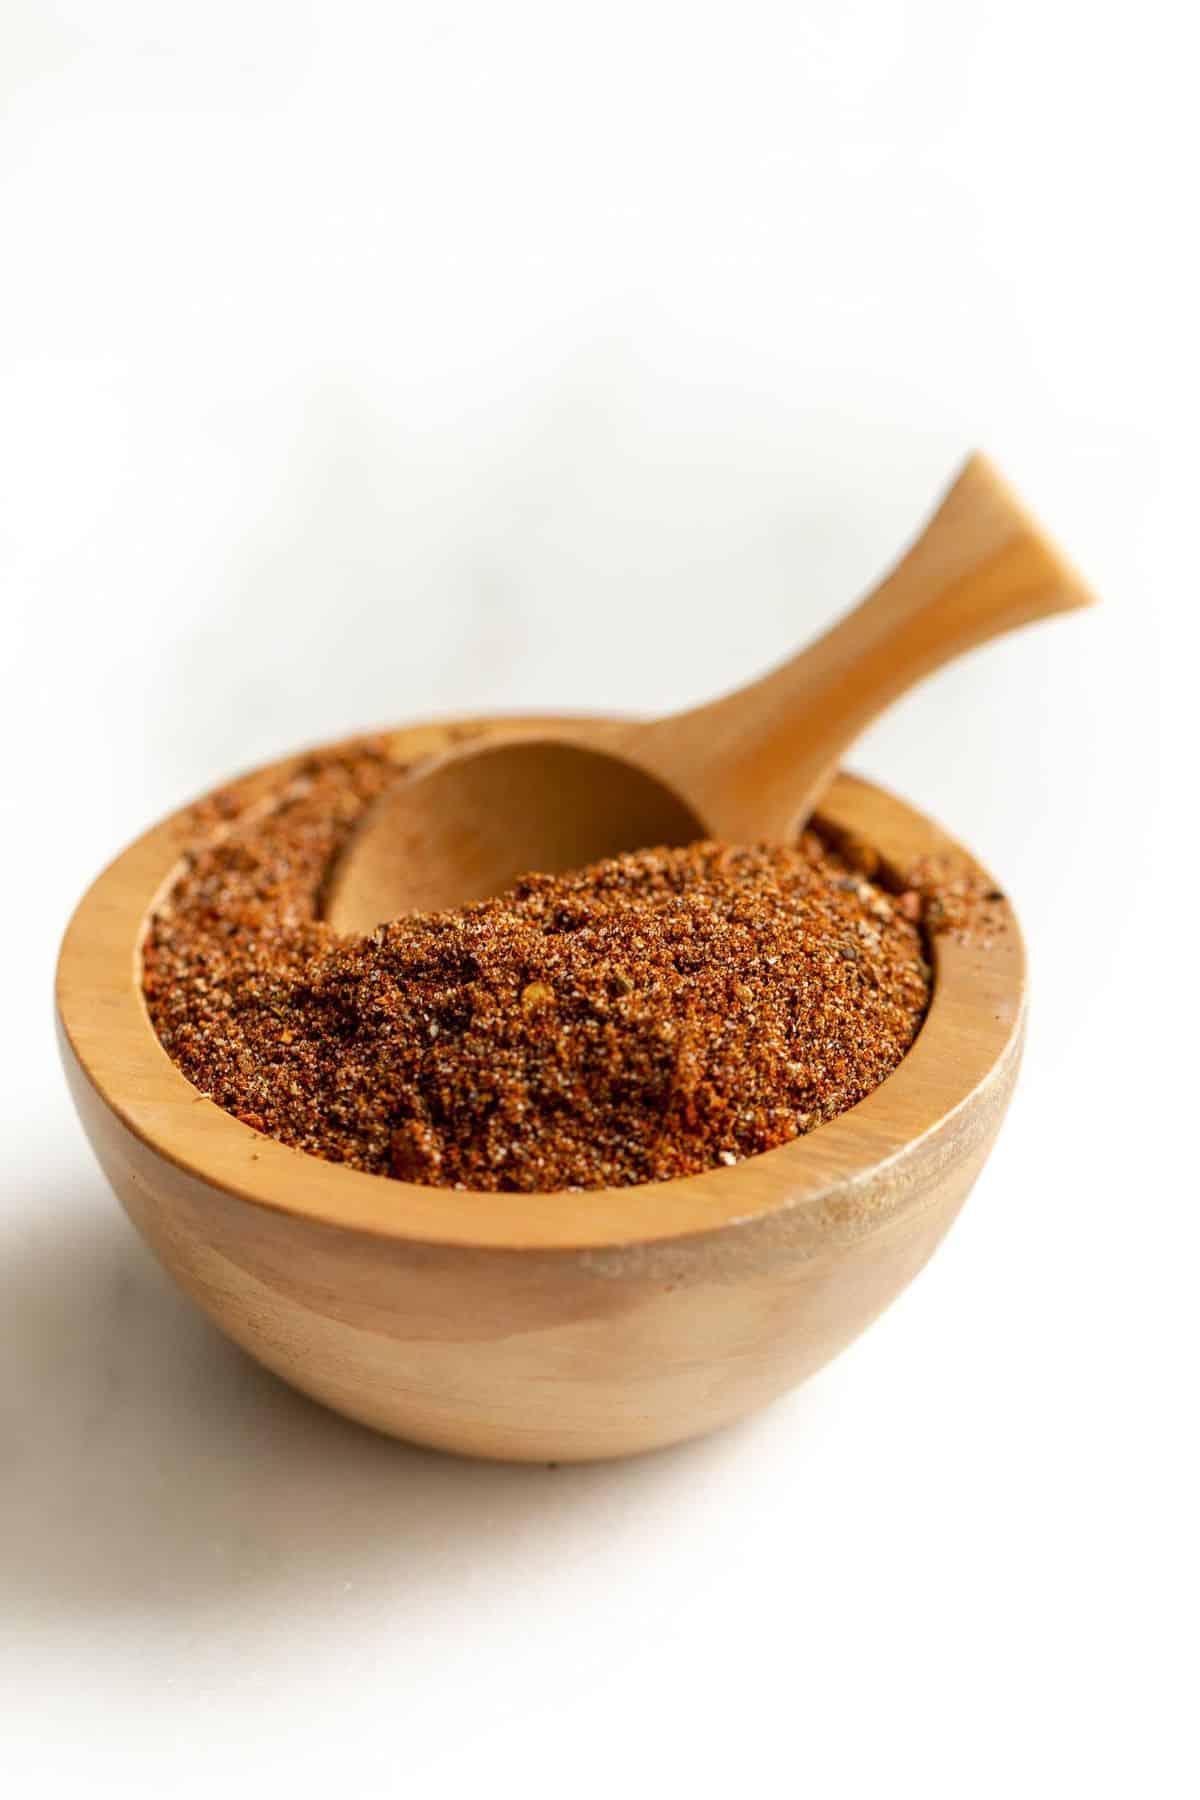 Homemade taco seasoning in a wooden bowl with a wooden spoon. on a white surface.